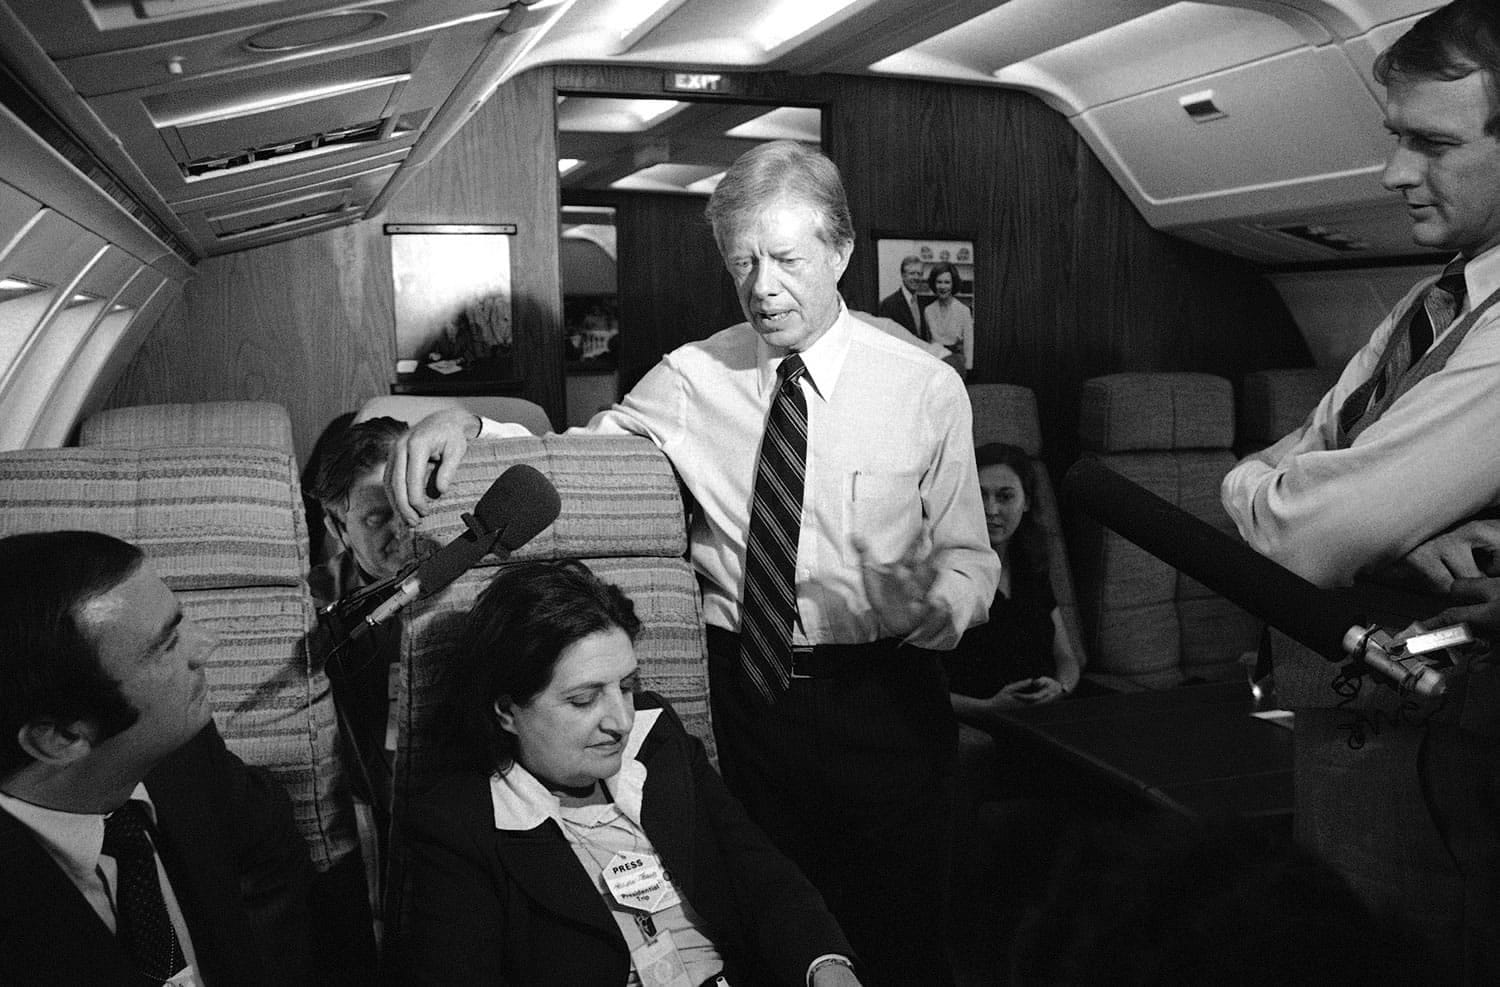 President Jimmy Carter and press secretary Jody Powell, right, talk with reporters Helen Thomas, center, and Sam Donaldson, left, while aboard Air Force One on Oct. 20, 1979 prior to landing at Andrews Air Force Base, Md. Thomas, a pioneer for women in journalism and an irrepressible White House correspondent, died July 20.